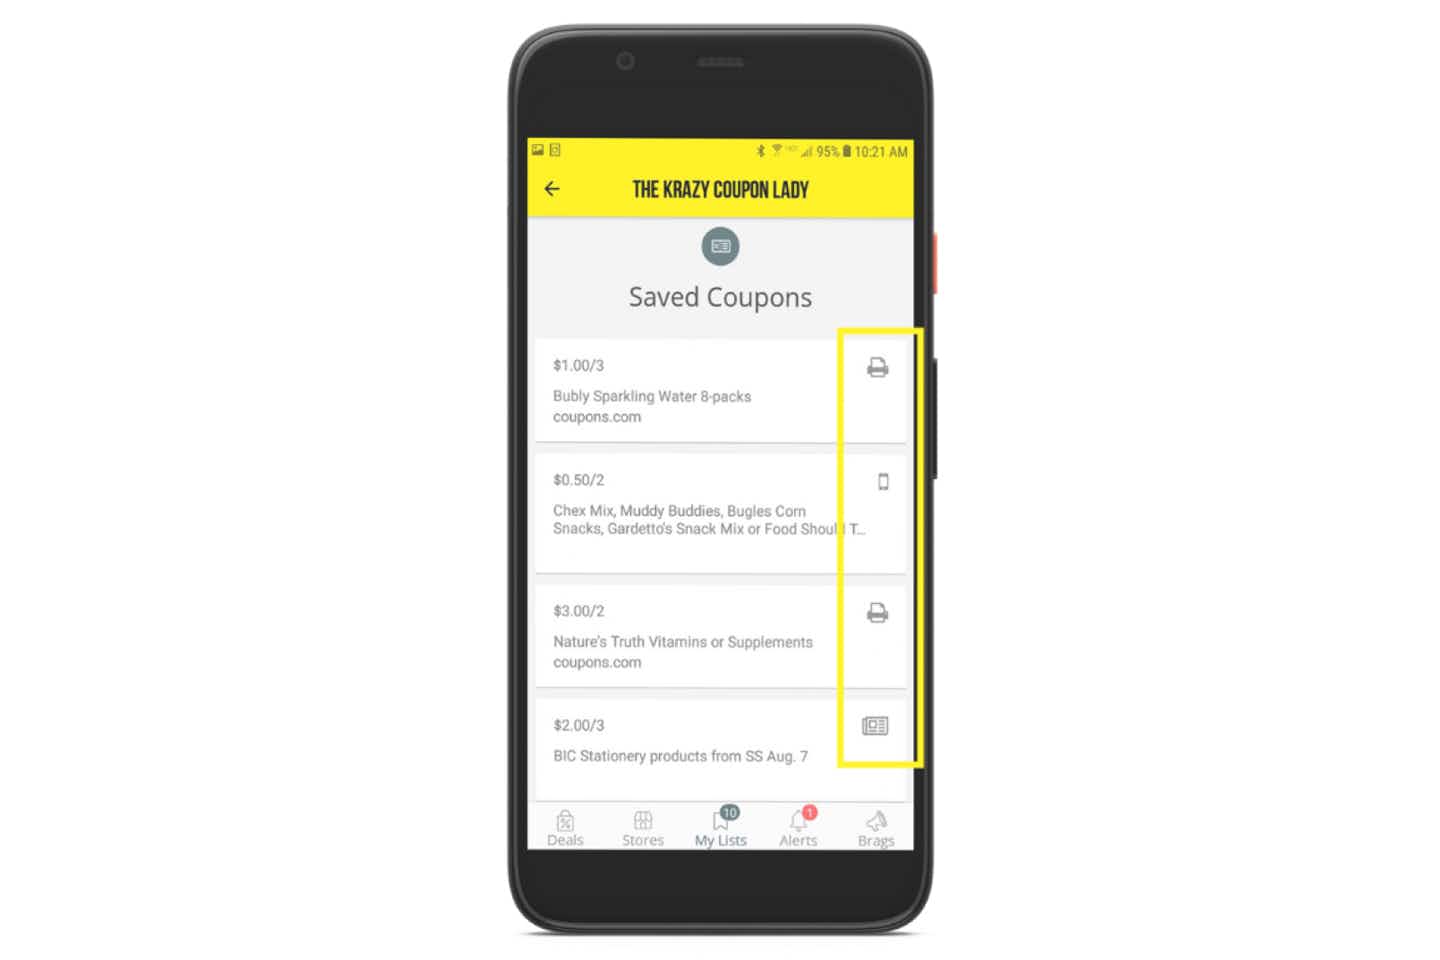 screenshot of Android app showing coupons list